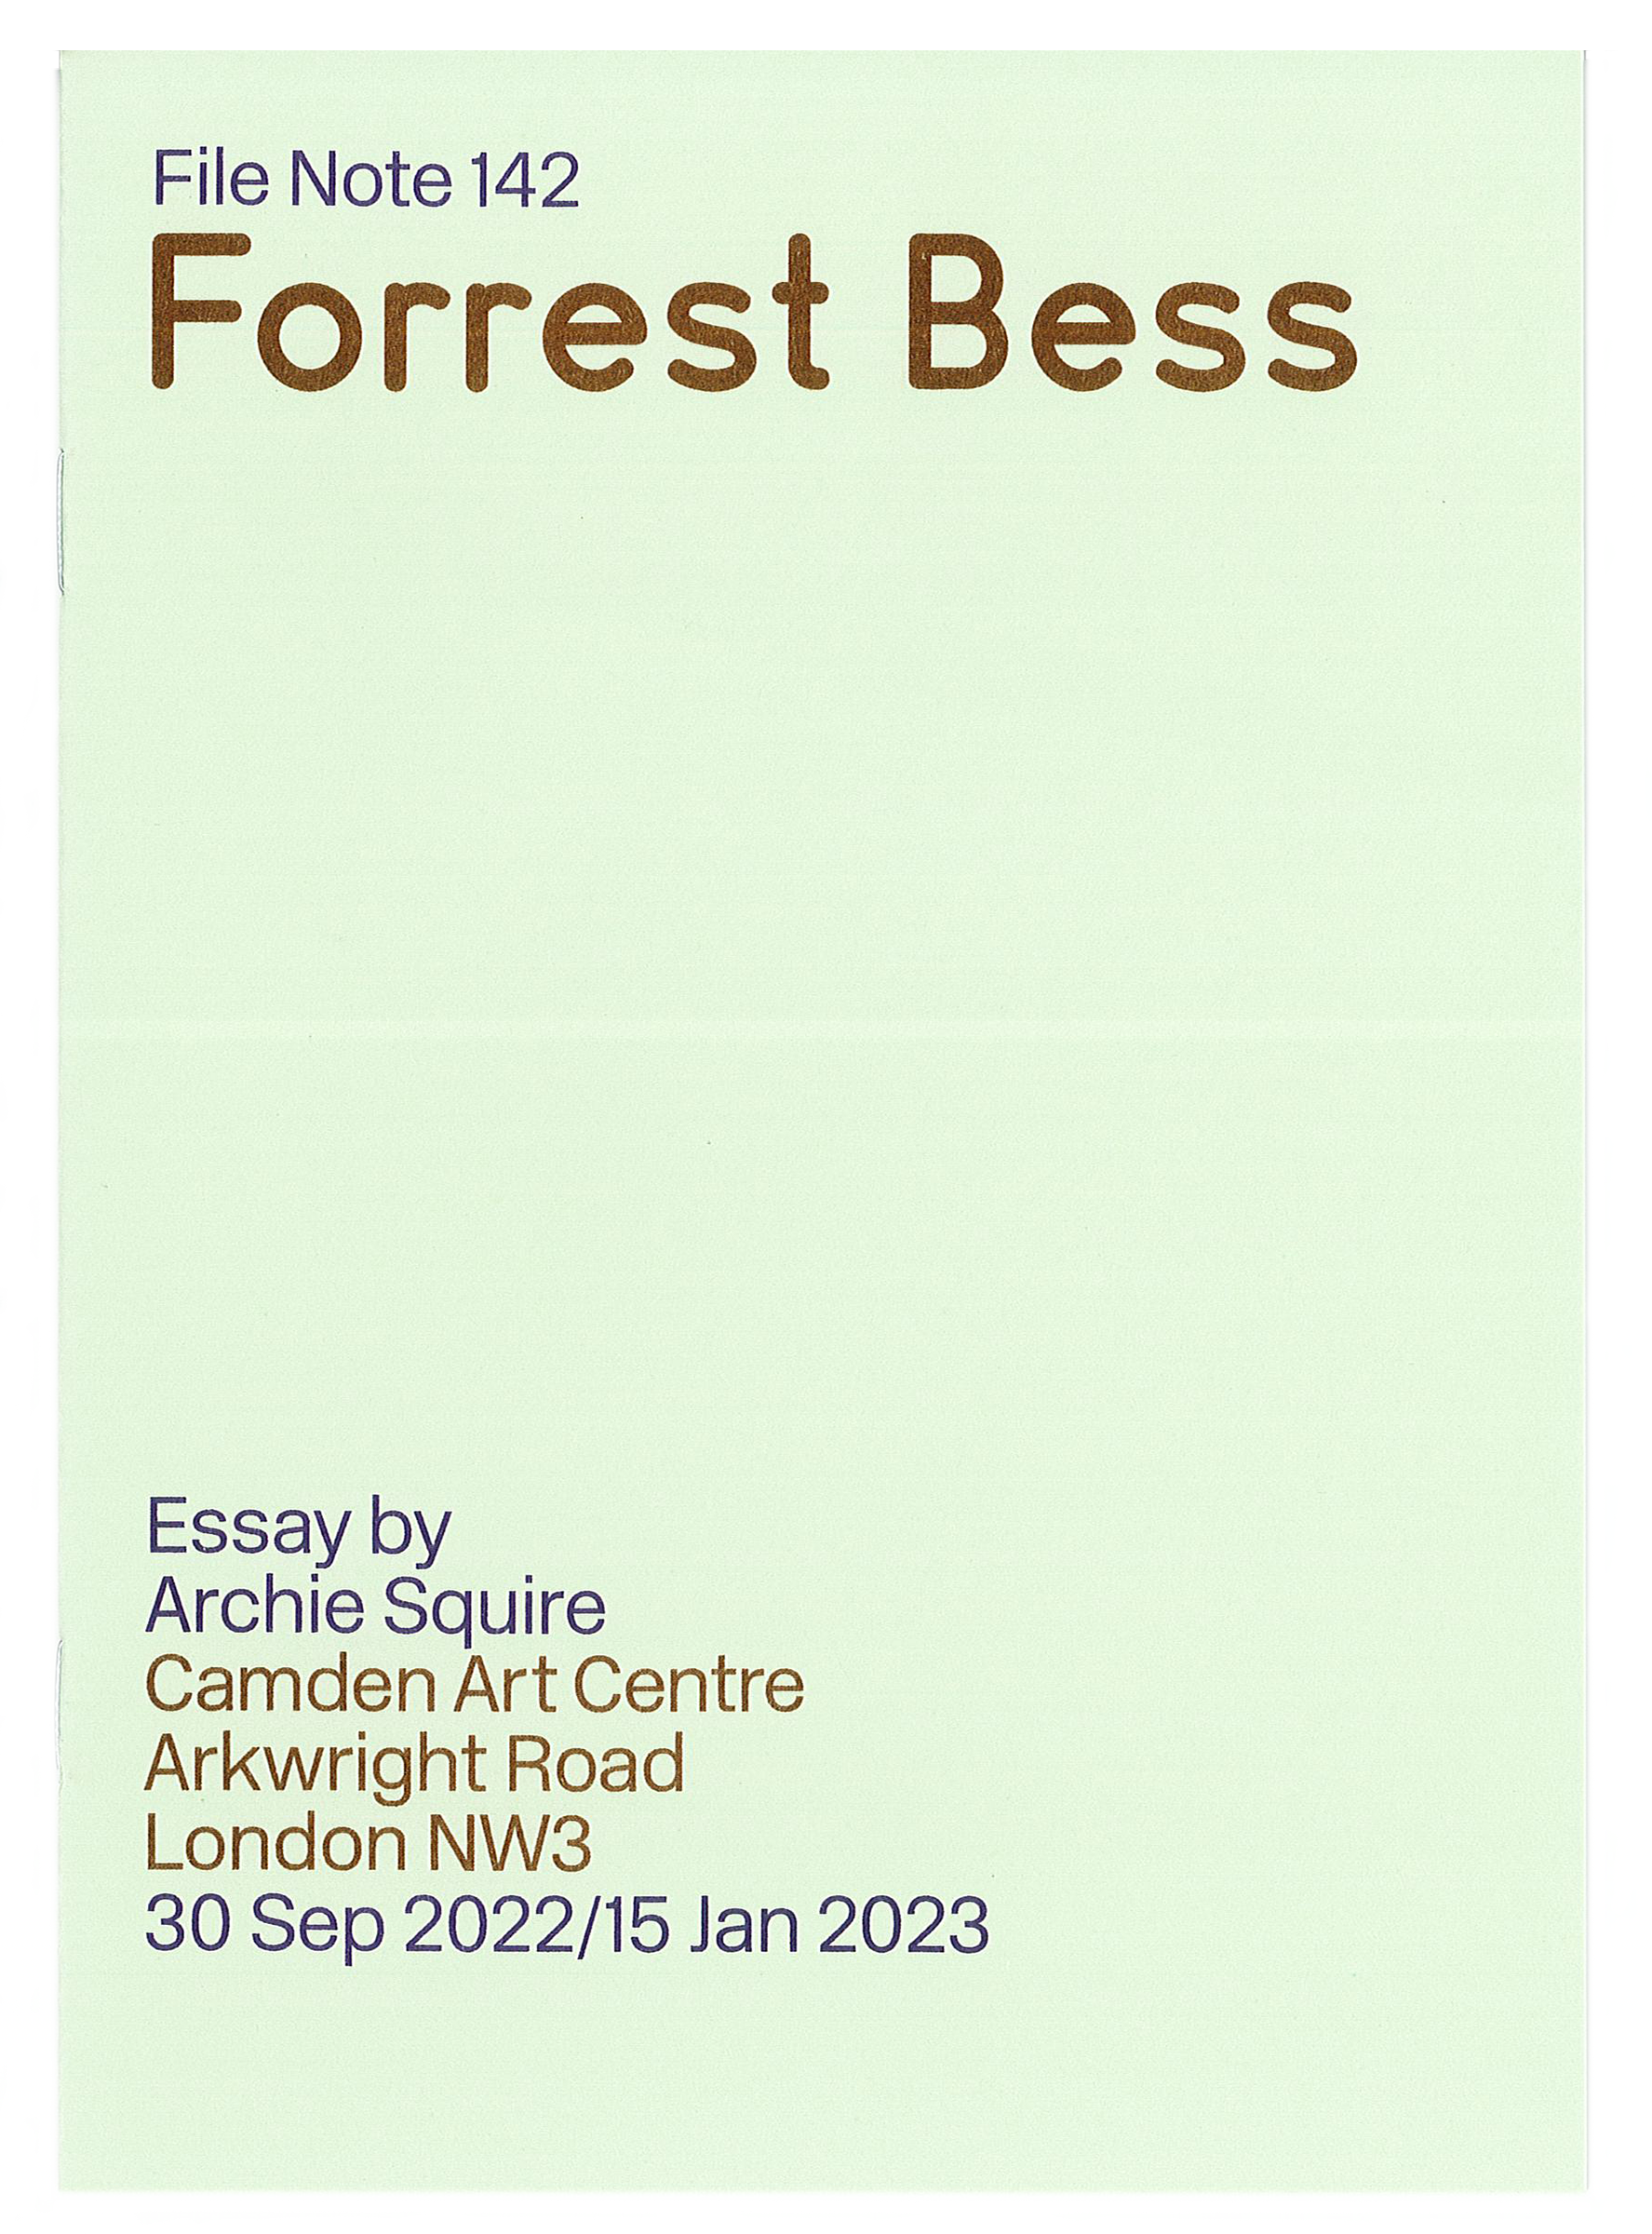 File Note 142, Forrest Bess